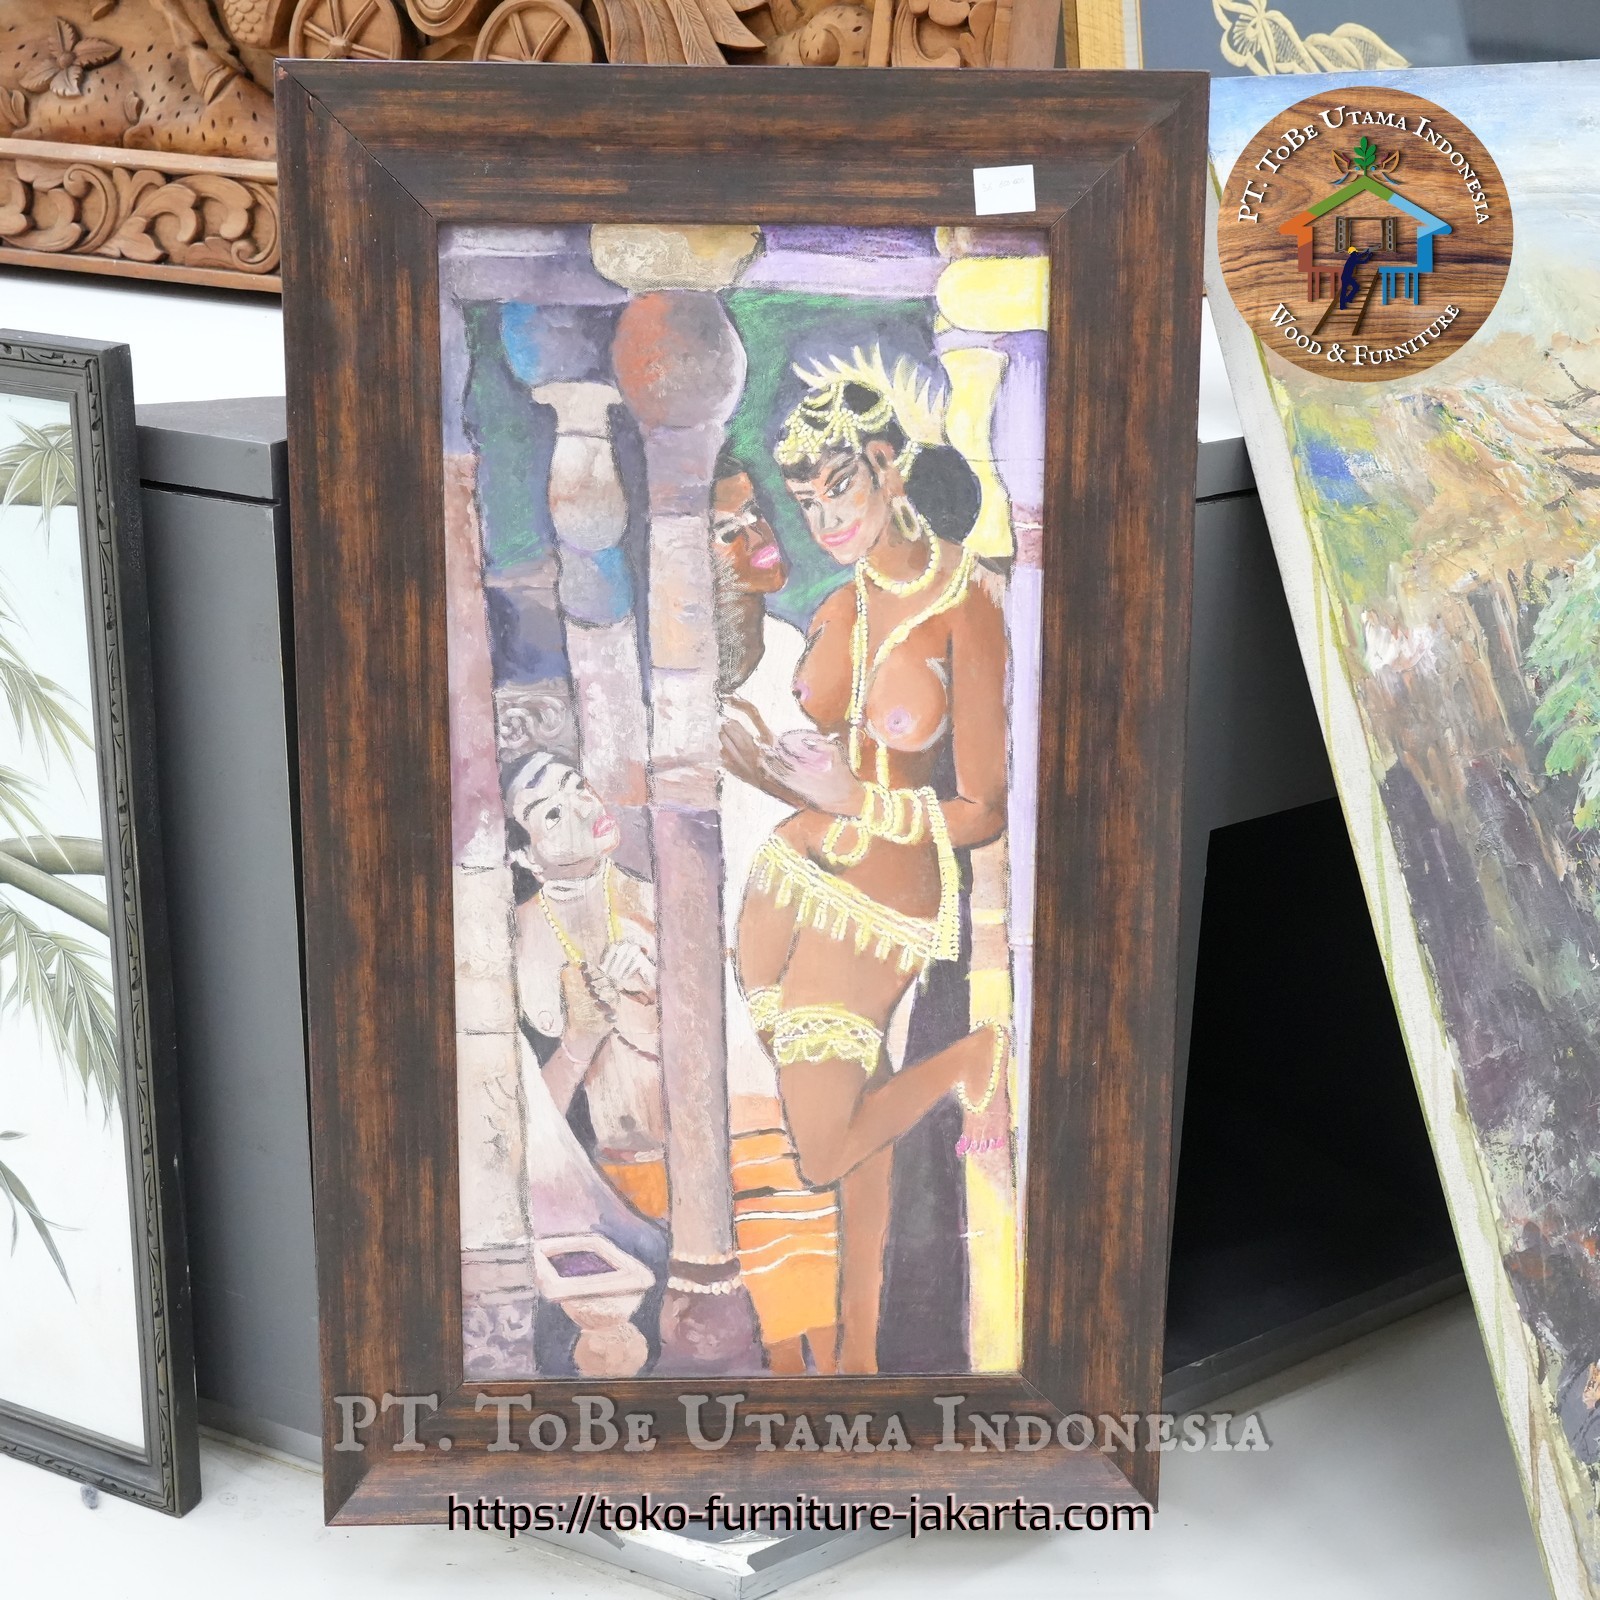 Accessories: Indiana Antique Canvas Painting (image 1 of 5).